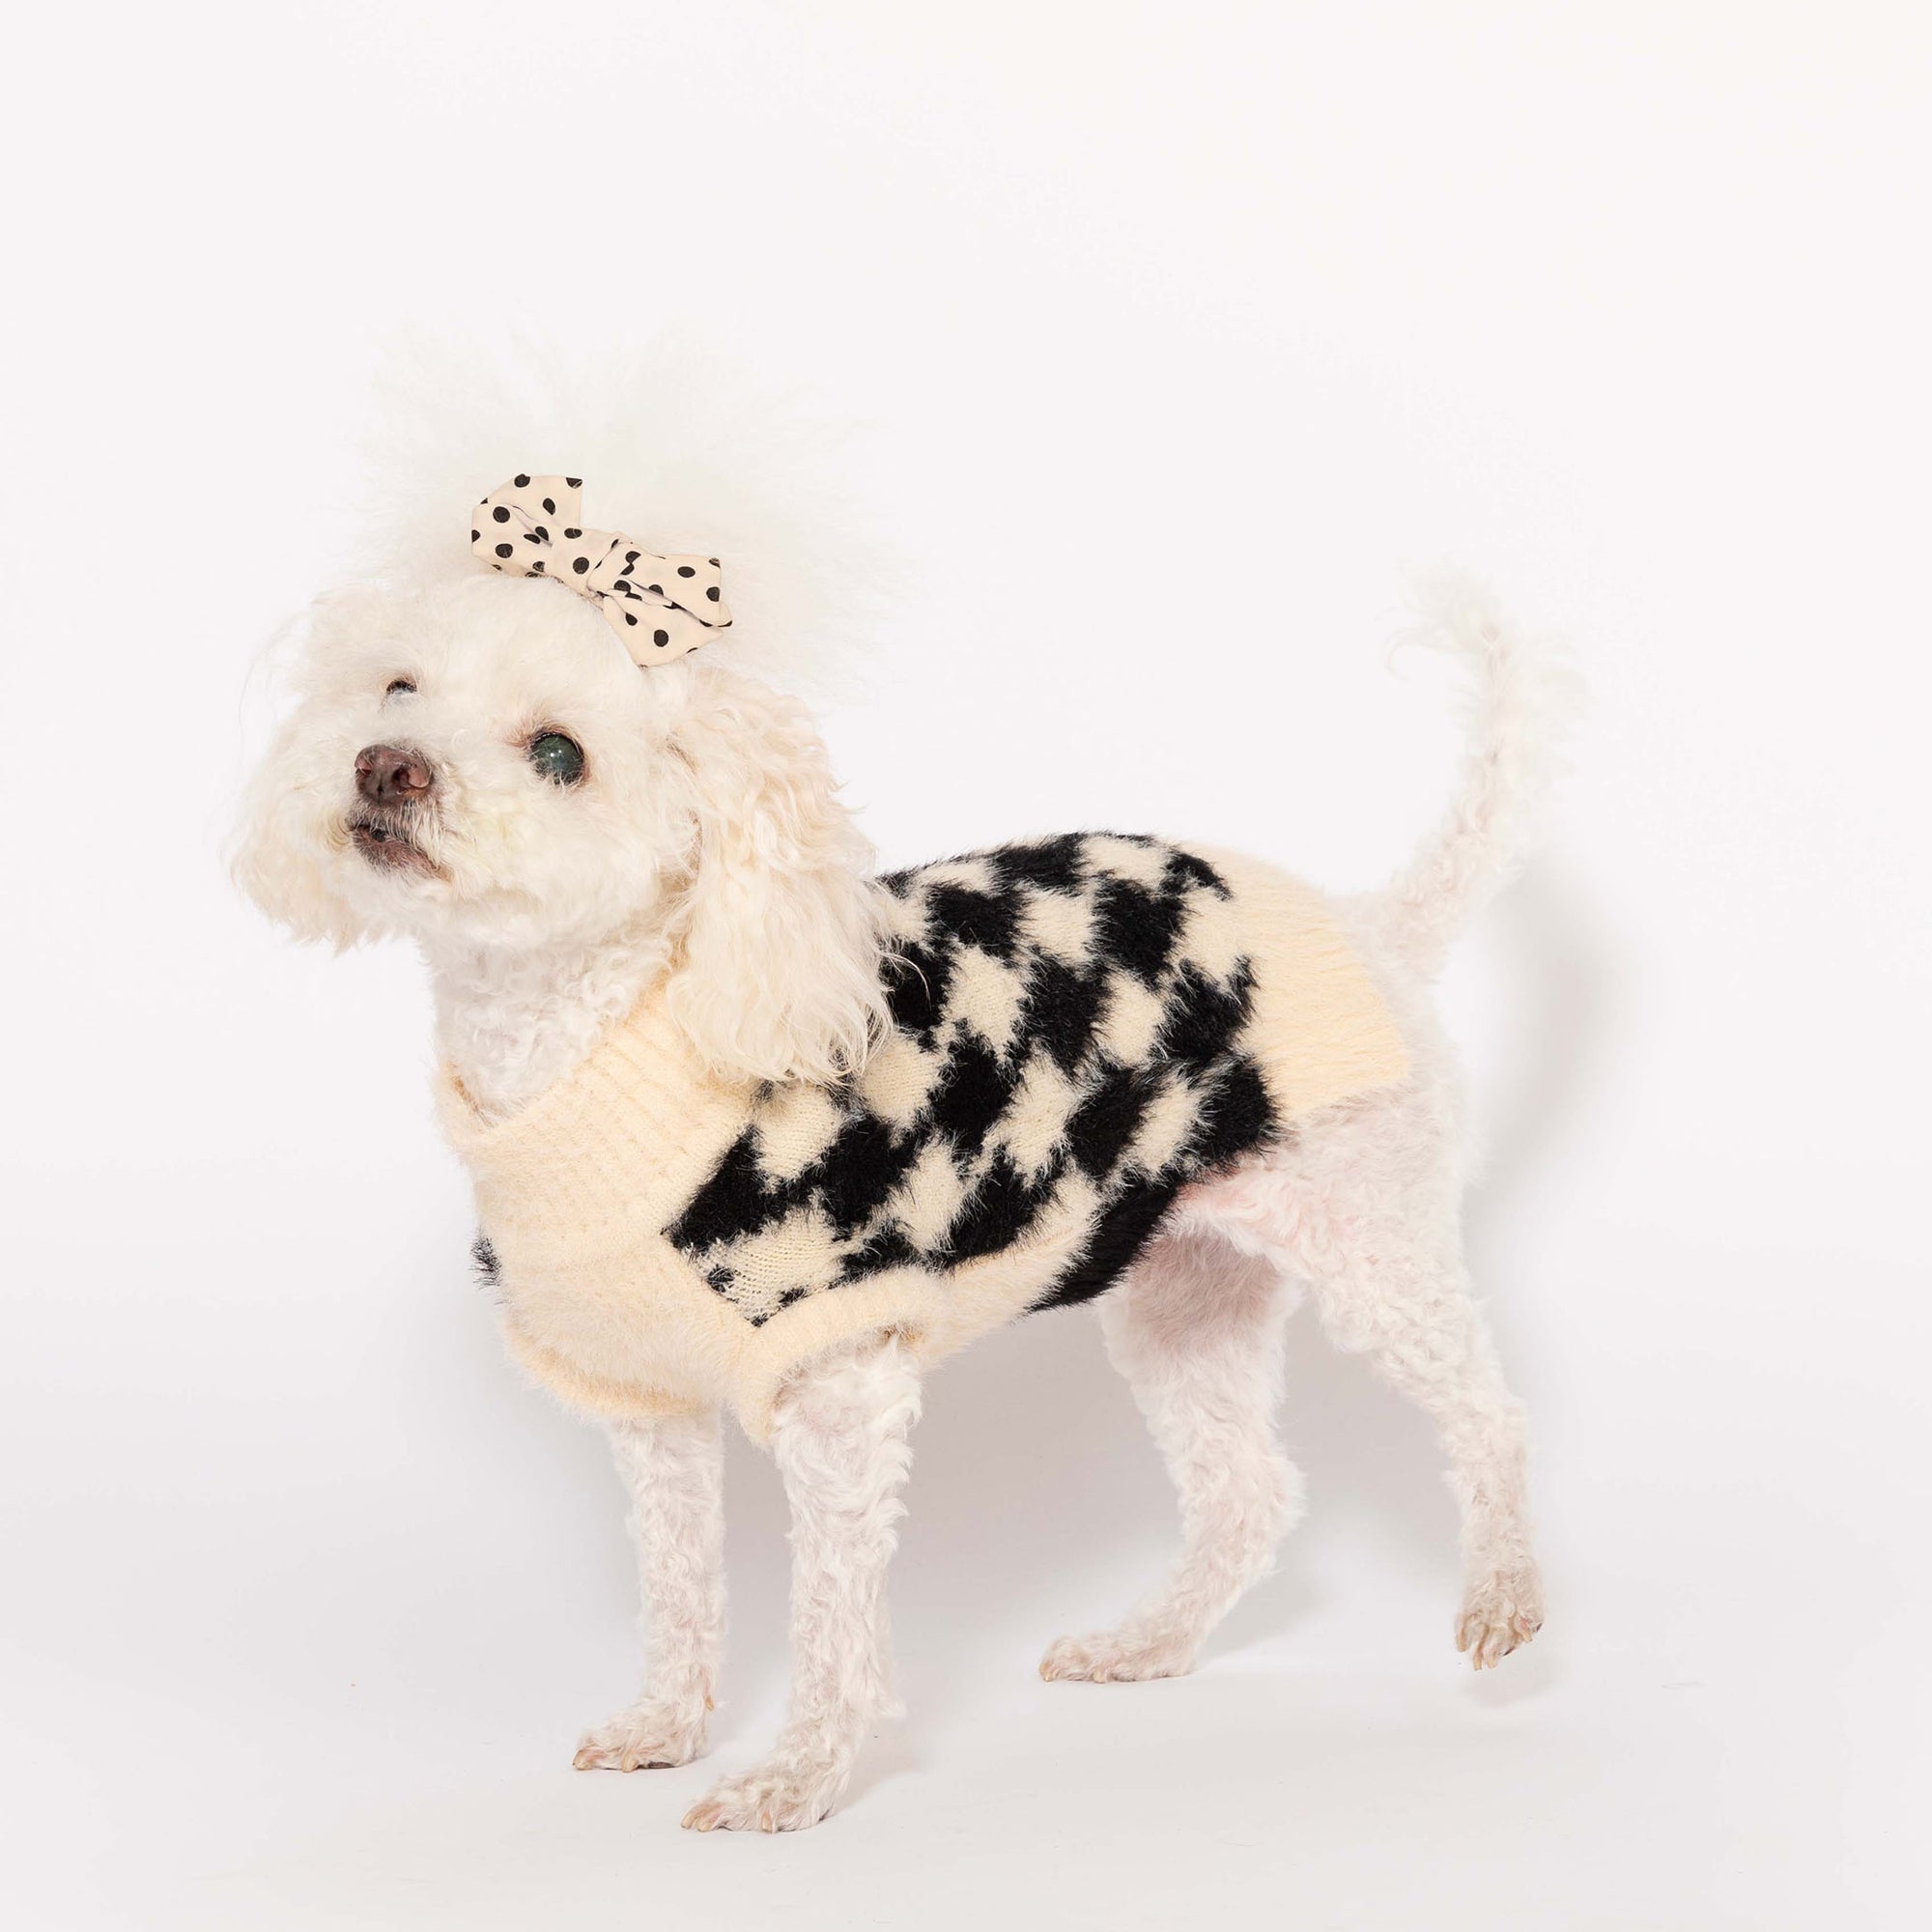 Fluffy white poodle in a stylish beige and black houndstooth sweater, adorned with a cute polka dot bow, against a white background.